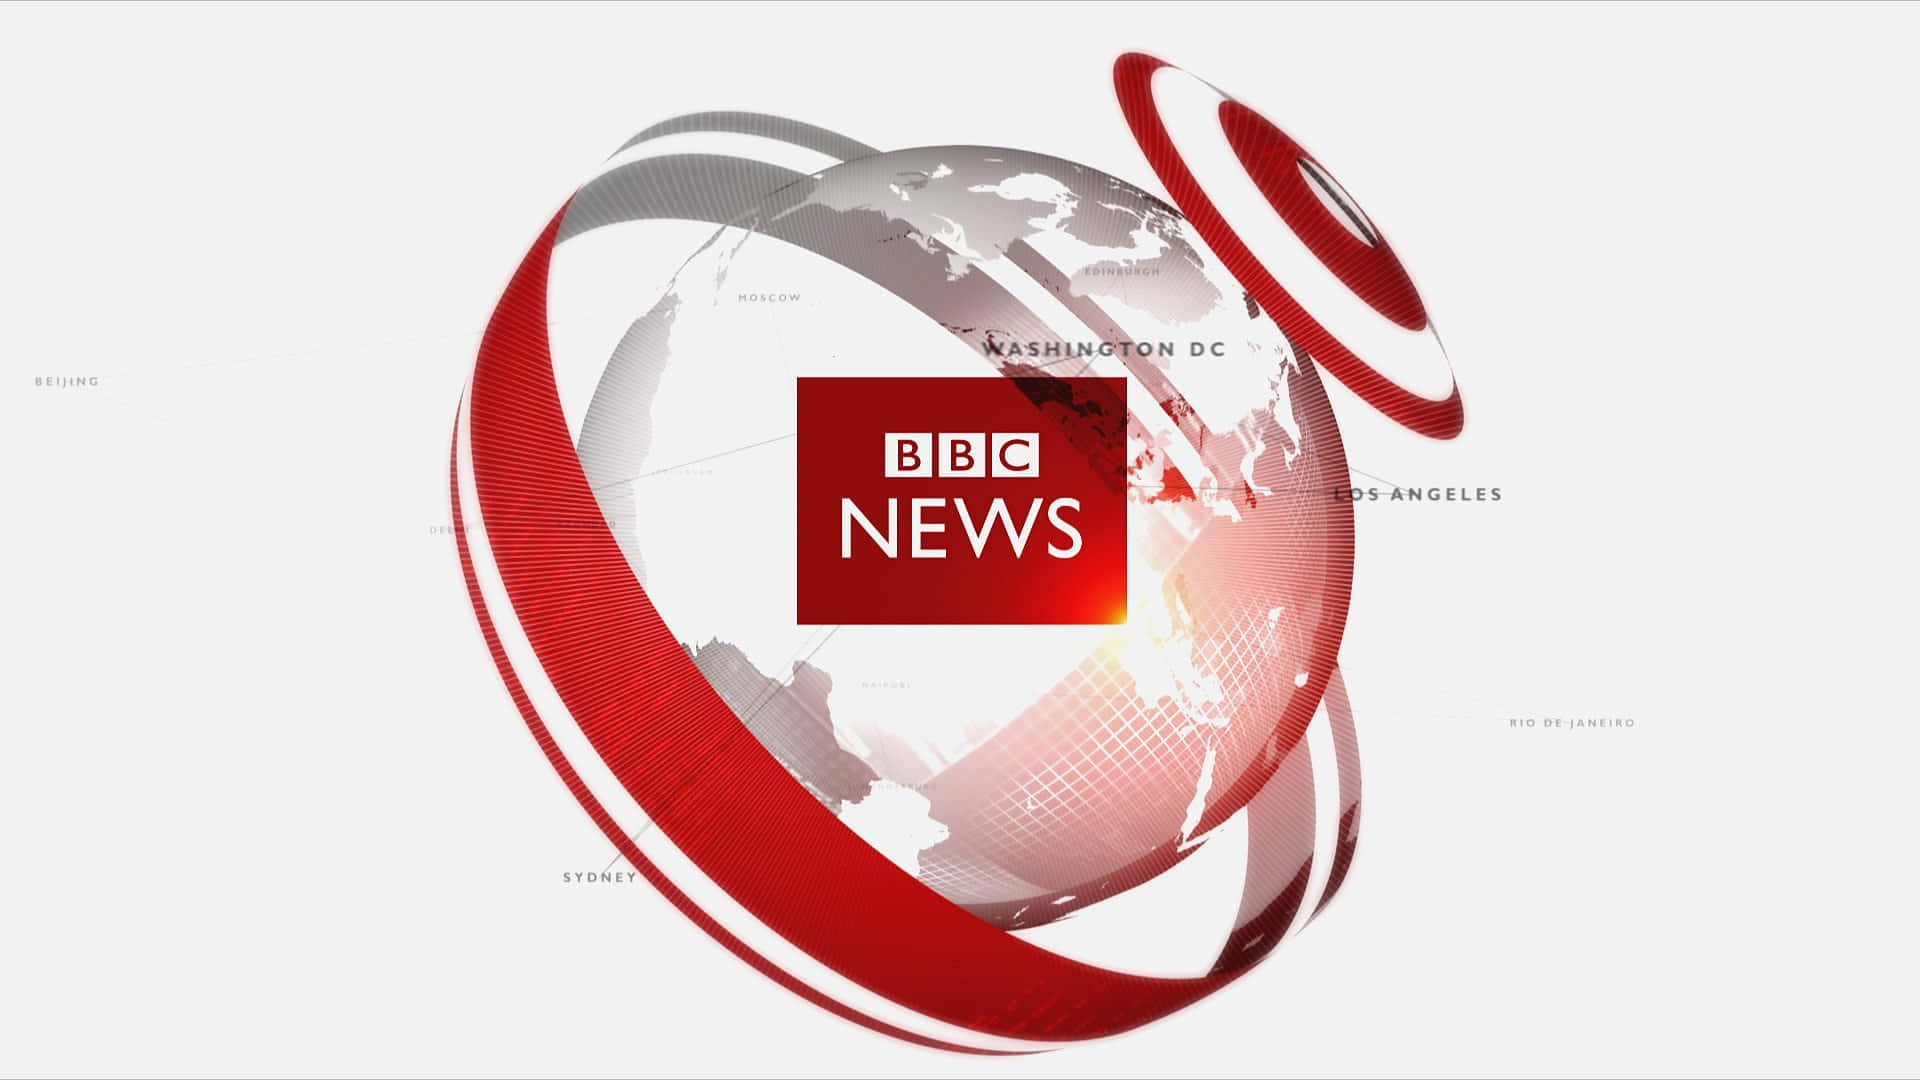 BBC News Offers Up-To-Date and Unbiased Coverage